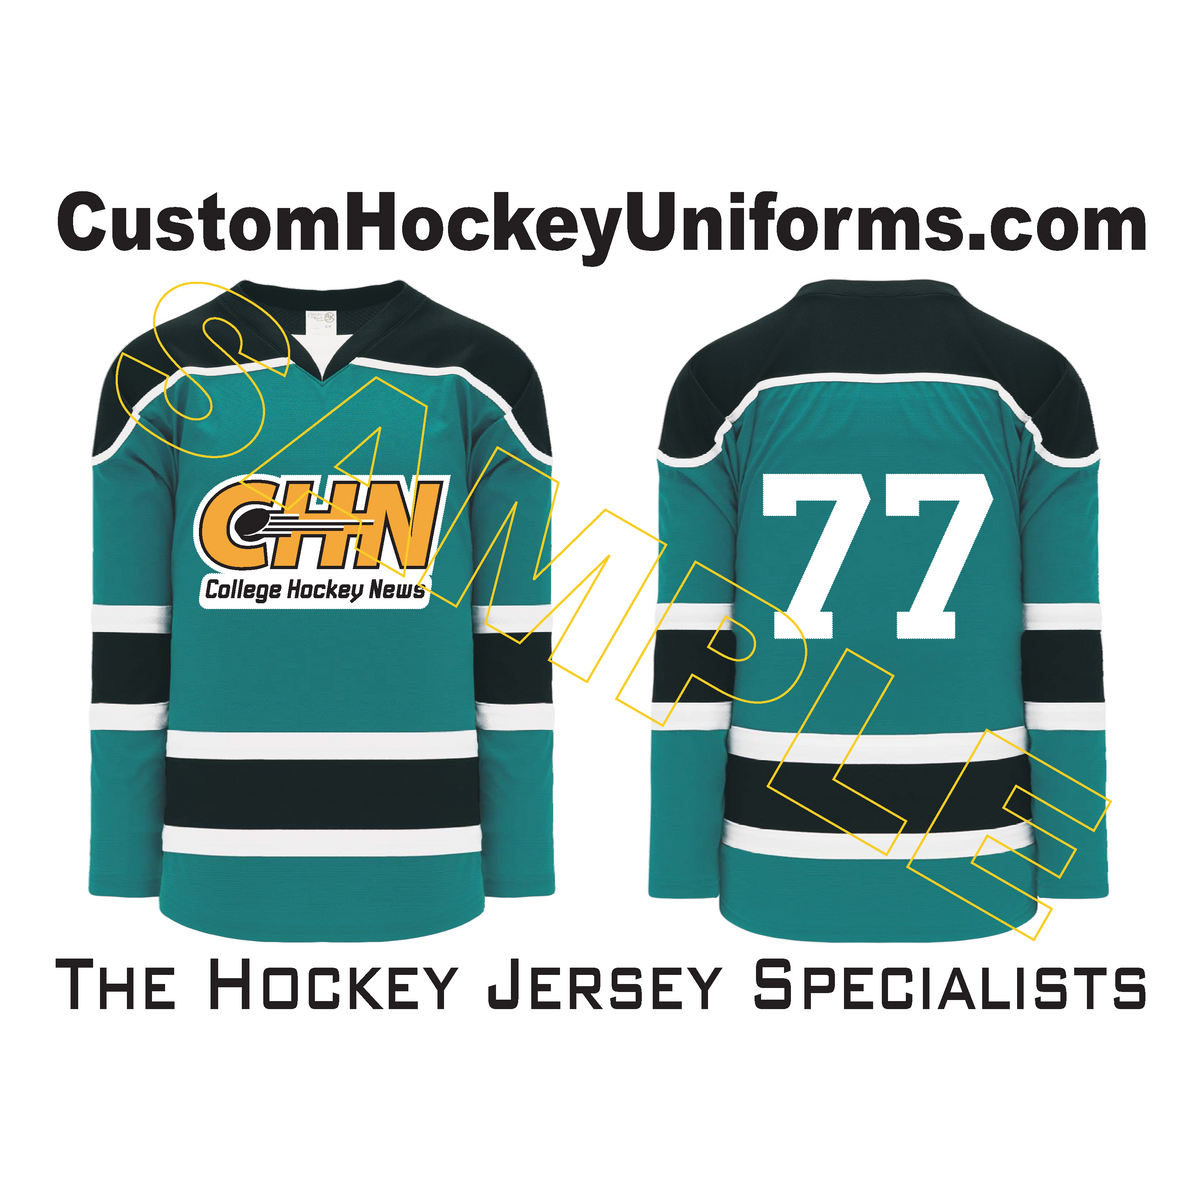 This week's #TealTuesday Jersey Auction features the 2019